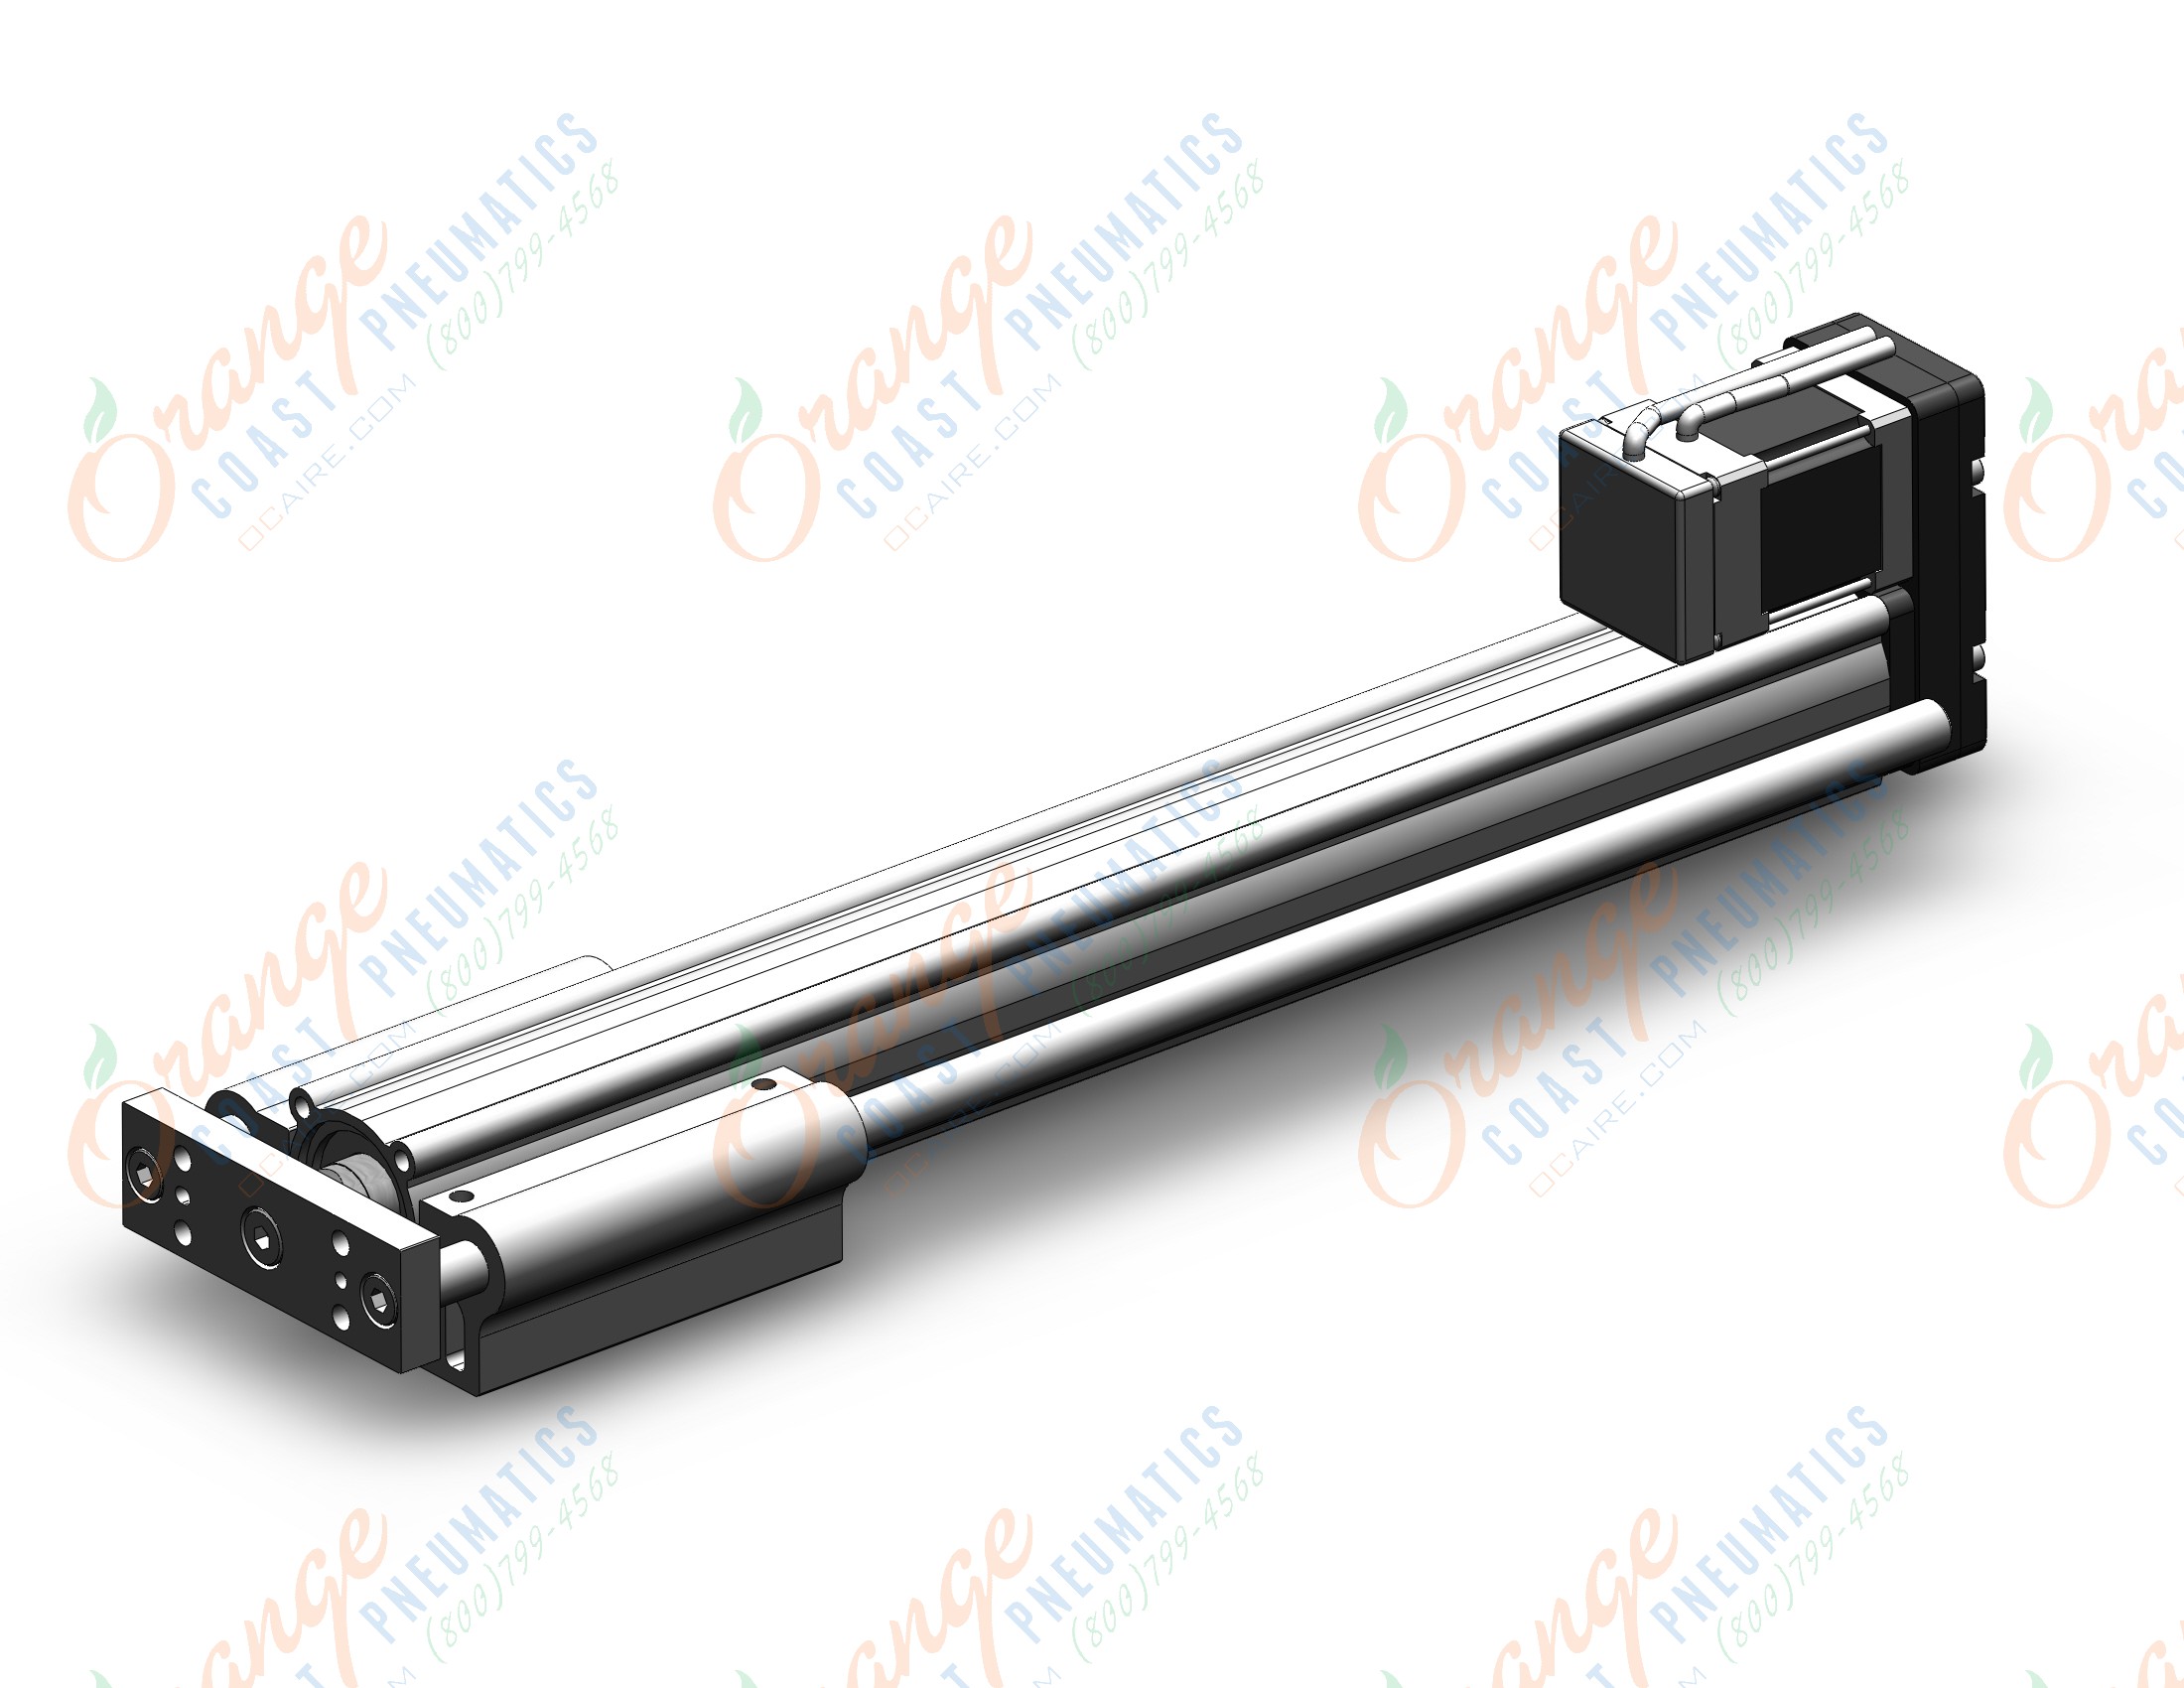 SMC LEYG25MB-300-S5C918 guide rod type electric actuator, ELECTRIC ACTUATOR